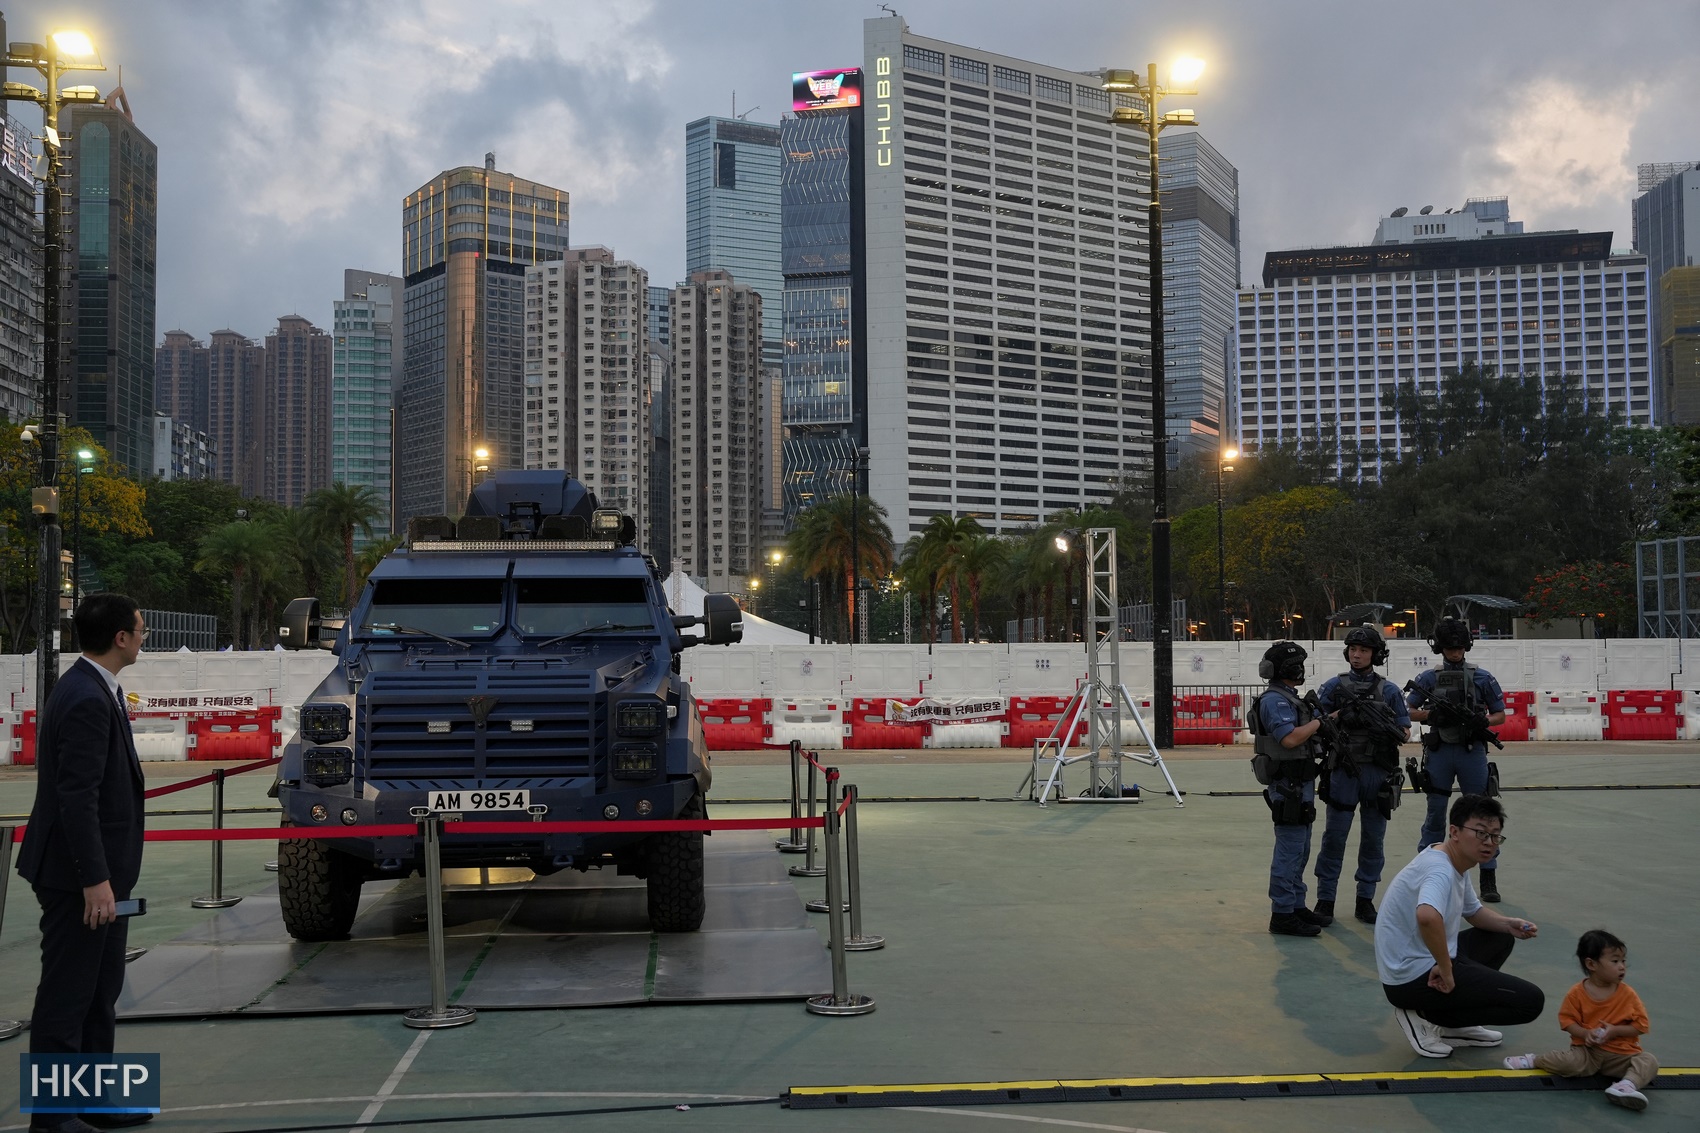 A carnival featuring booths about national security and showcasing police's armoured vehicles at Victoria Park, Causeway Bay, on April 15, 2024 as part of the activities of National Security Education Day. Photo: Kyle Lam/HKFP.